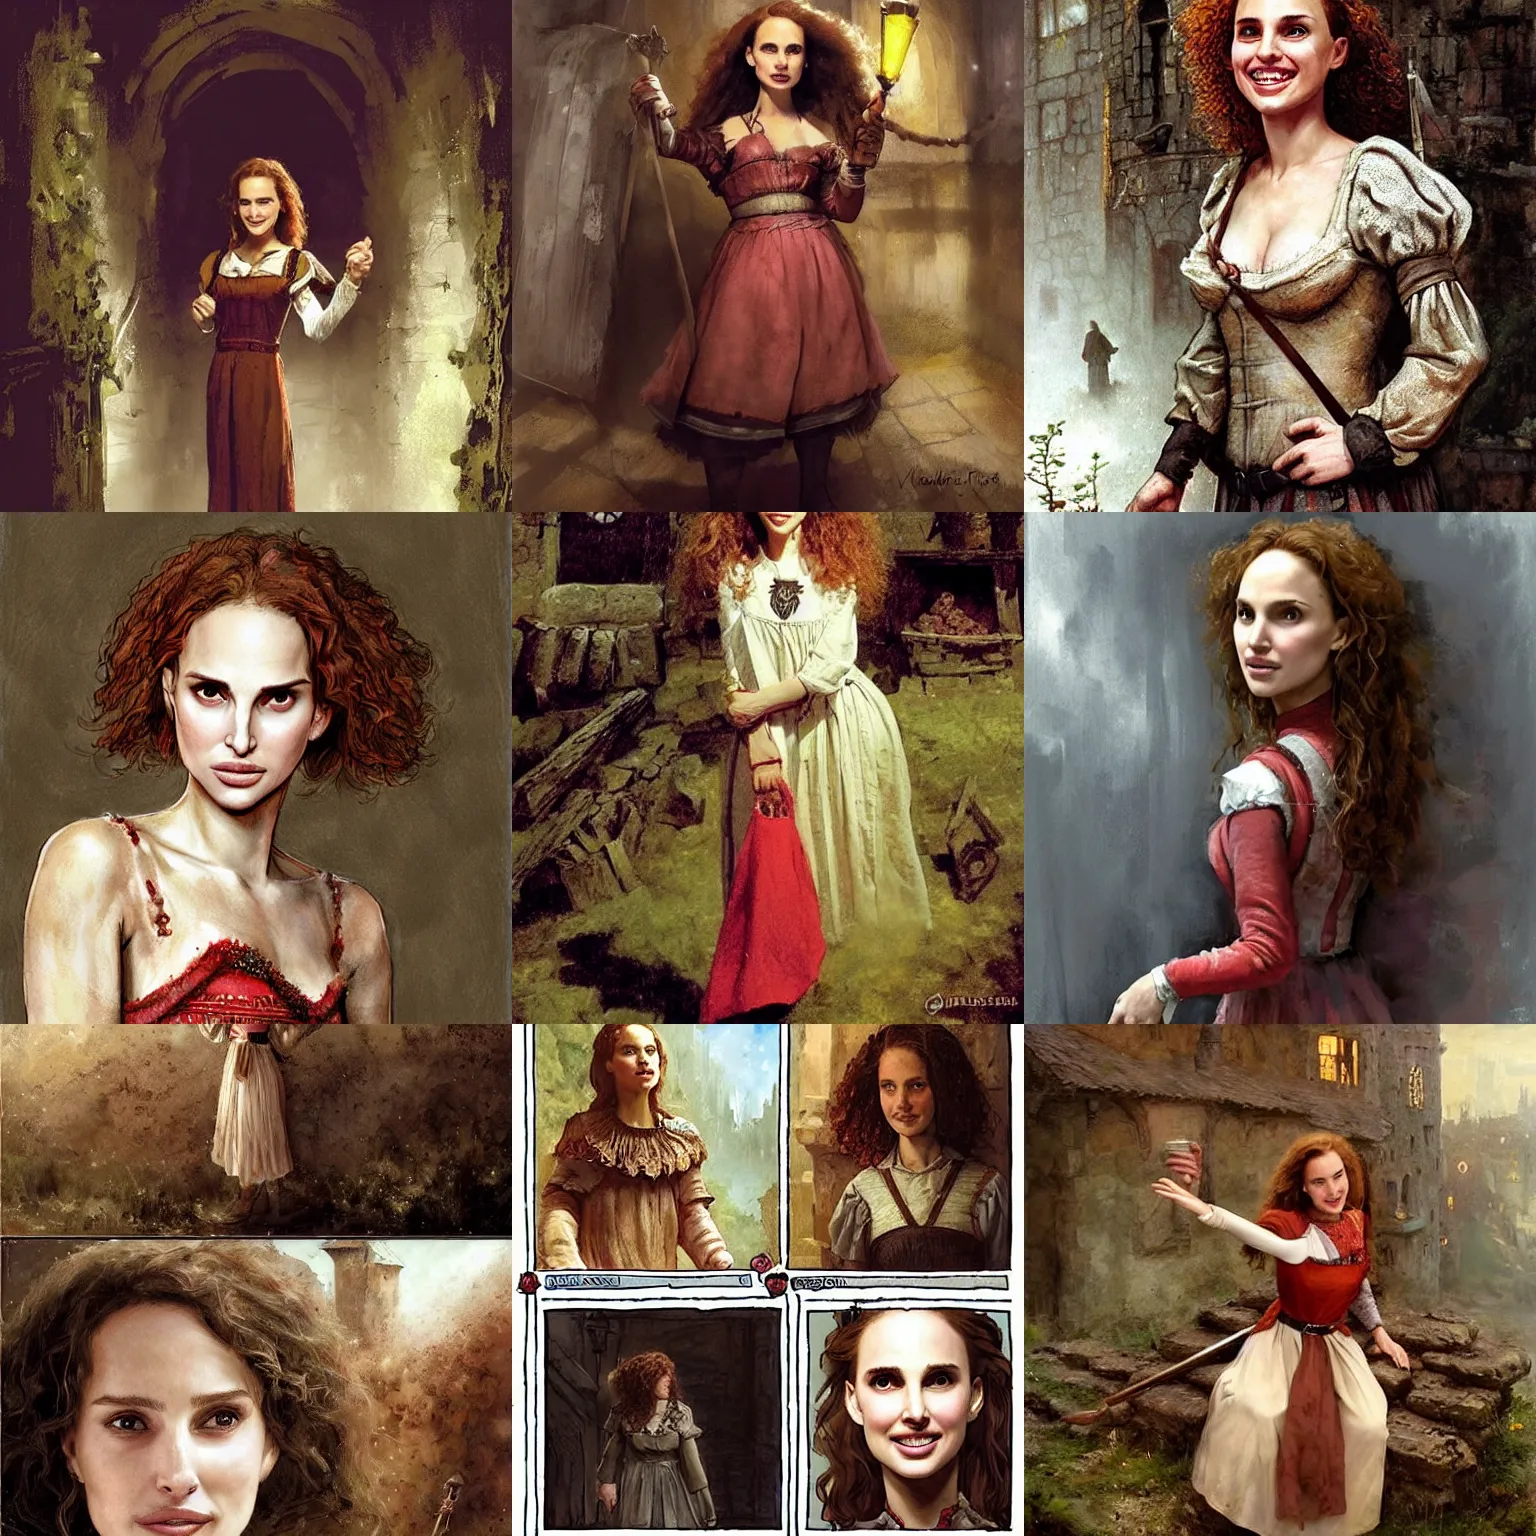 Prompt: young, freckled, curly haired, redhead natalie portman as a optimistic!, cheerful, giddy medieval innkeeper in a dark medieval inn. dark shadows, dim lights, colorful, law contrasts, fantasy concept art by jakub rozalski, jan matejko, and j. dickenson